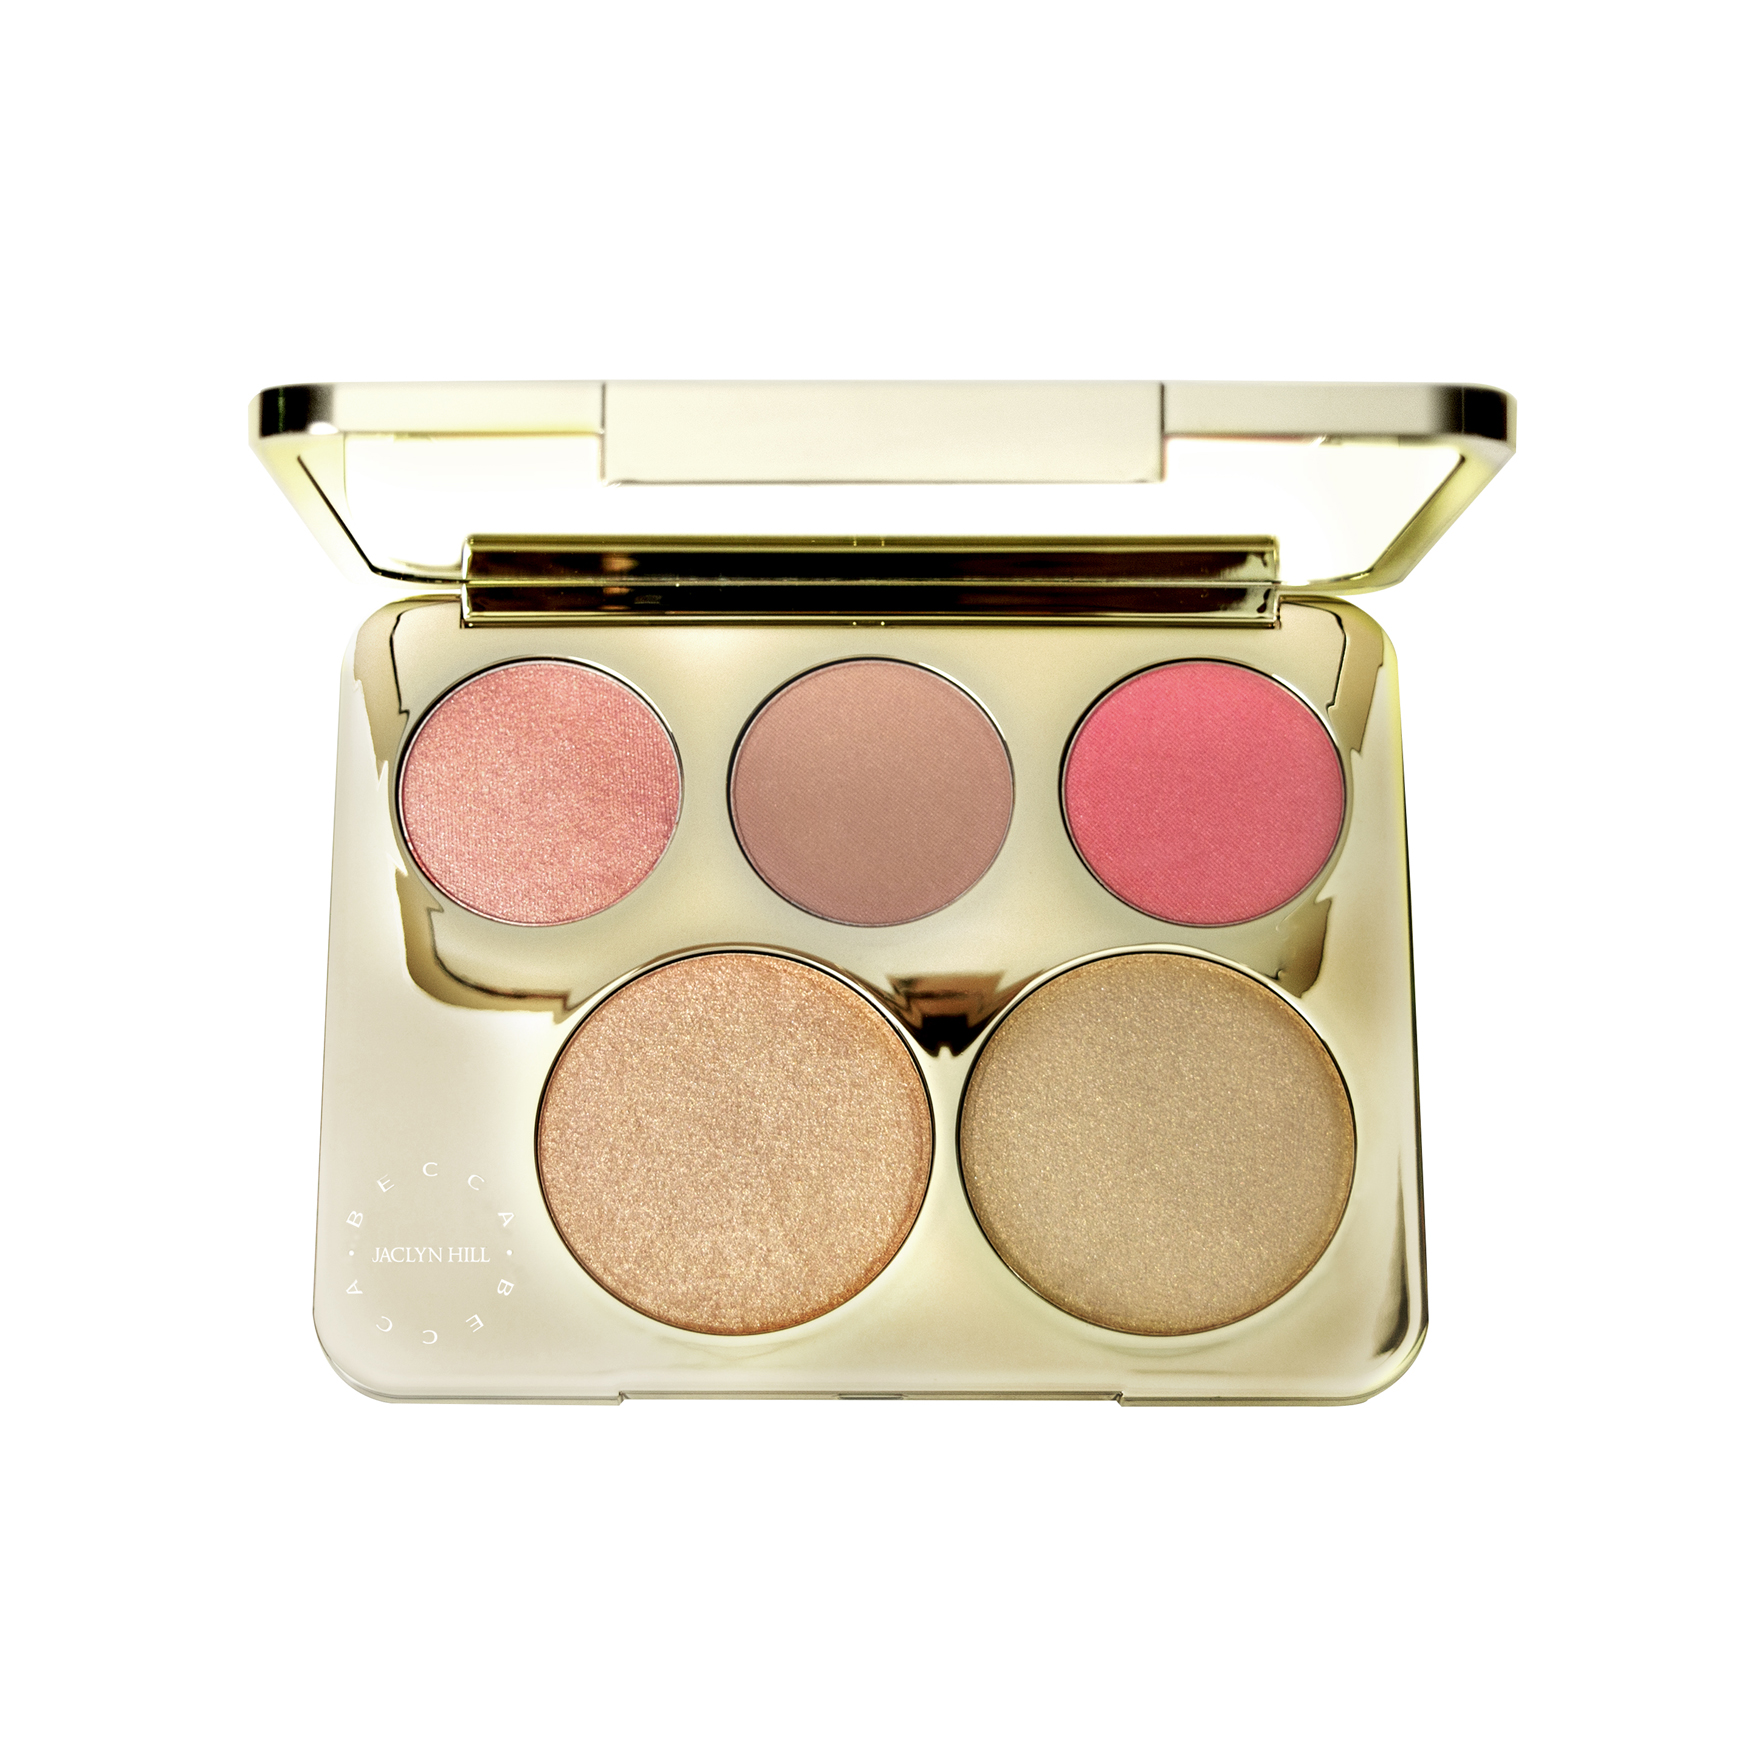 Becca BECCA x Jaclyn Hill Champagne Collection Face Palette | Space NK